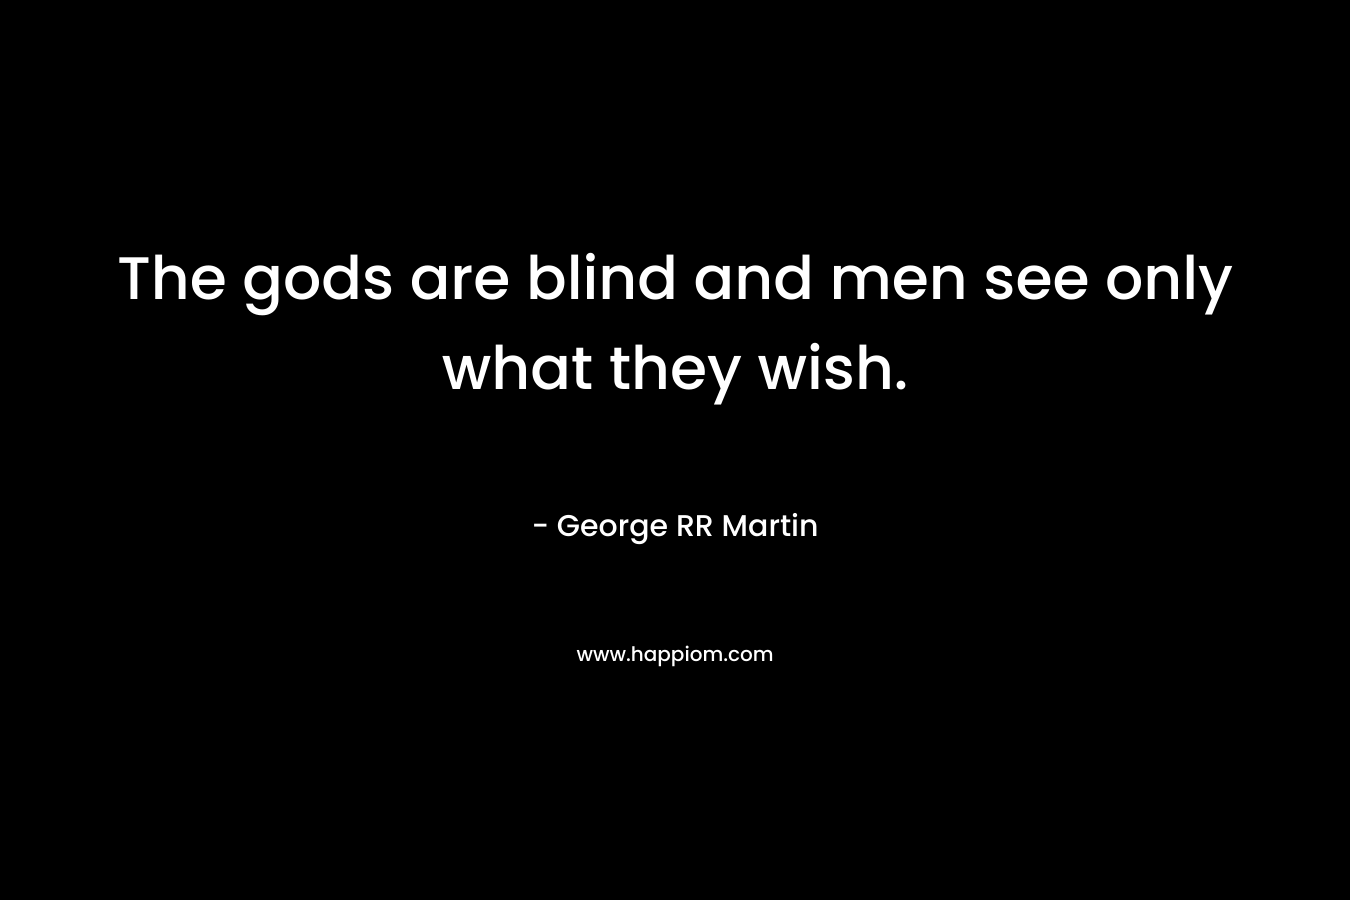 The gods are blind and men see only what they wish.